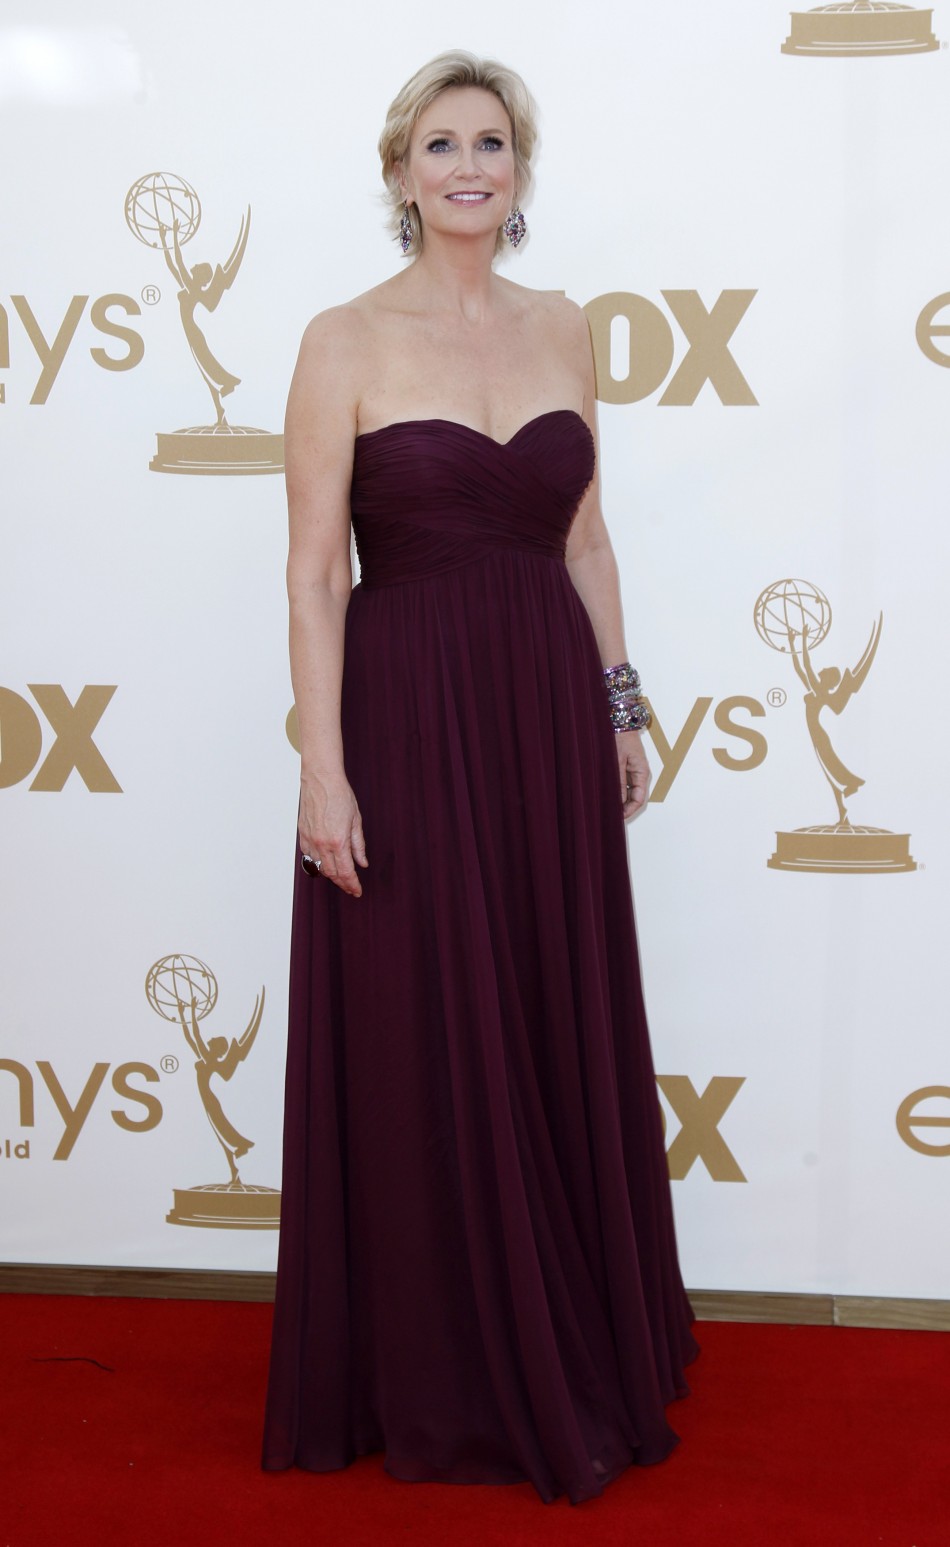 Actress and Emmy Awards host Jane Lynch at arrives at the 63rd Primetime Emmy Awards in Los Angeles September 18, 2011.